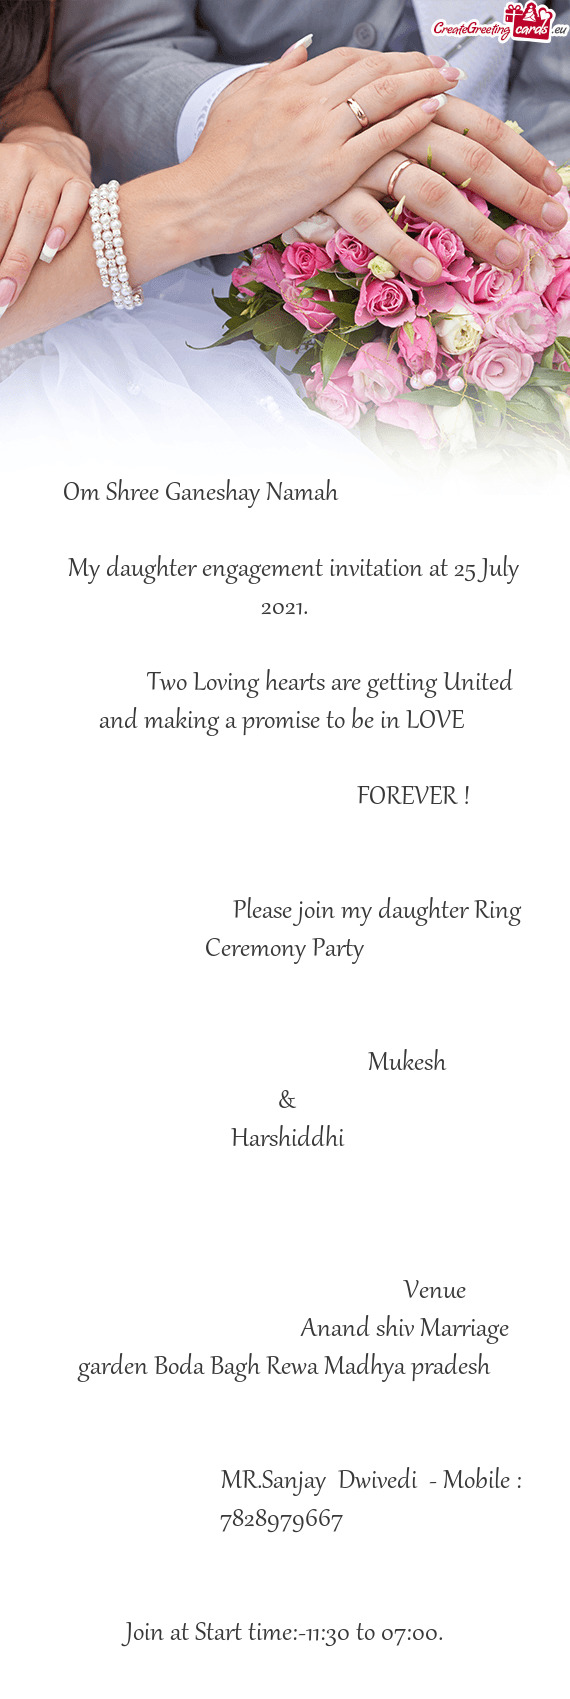 My daughter engagement invitation at 25 July 2021